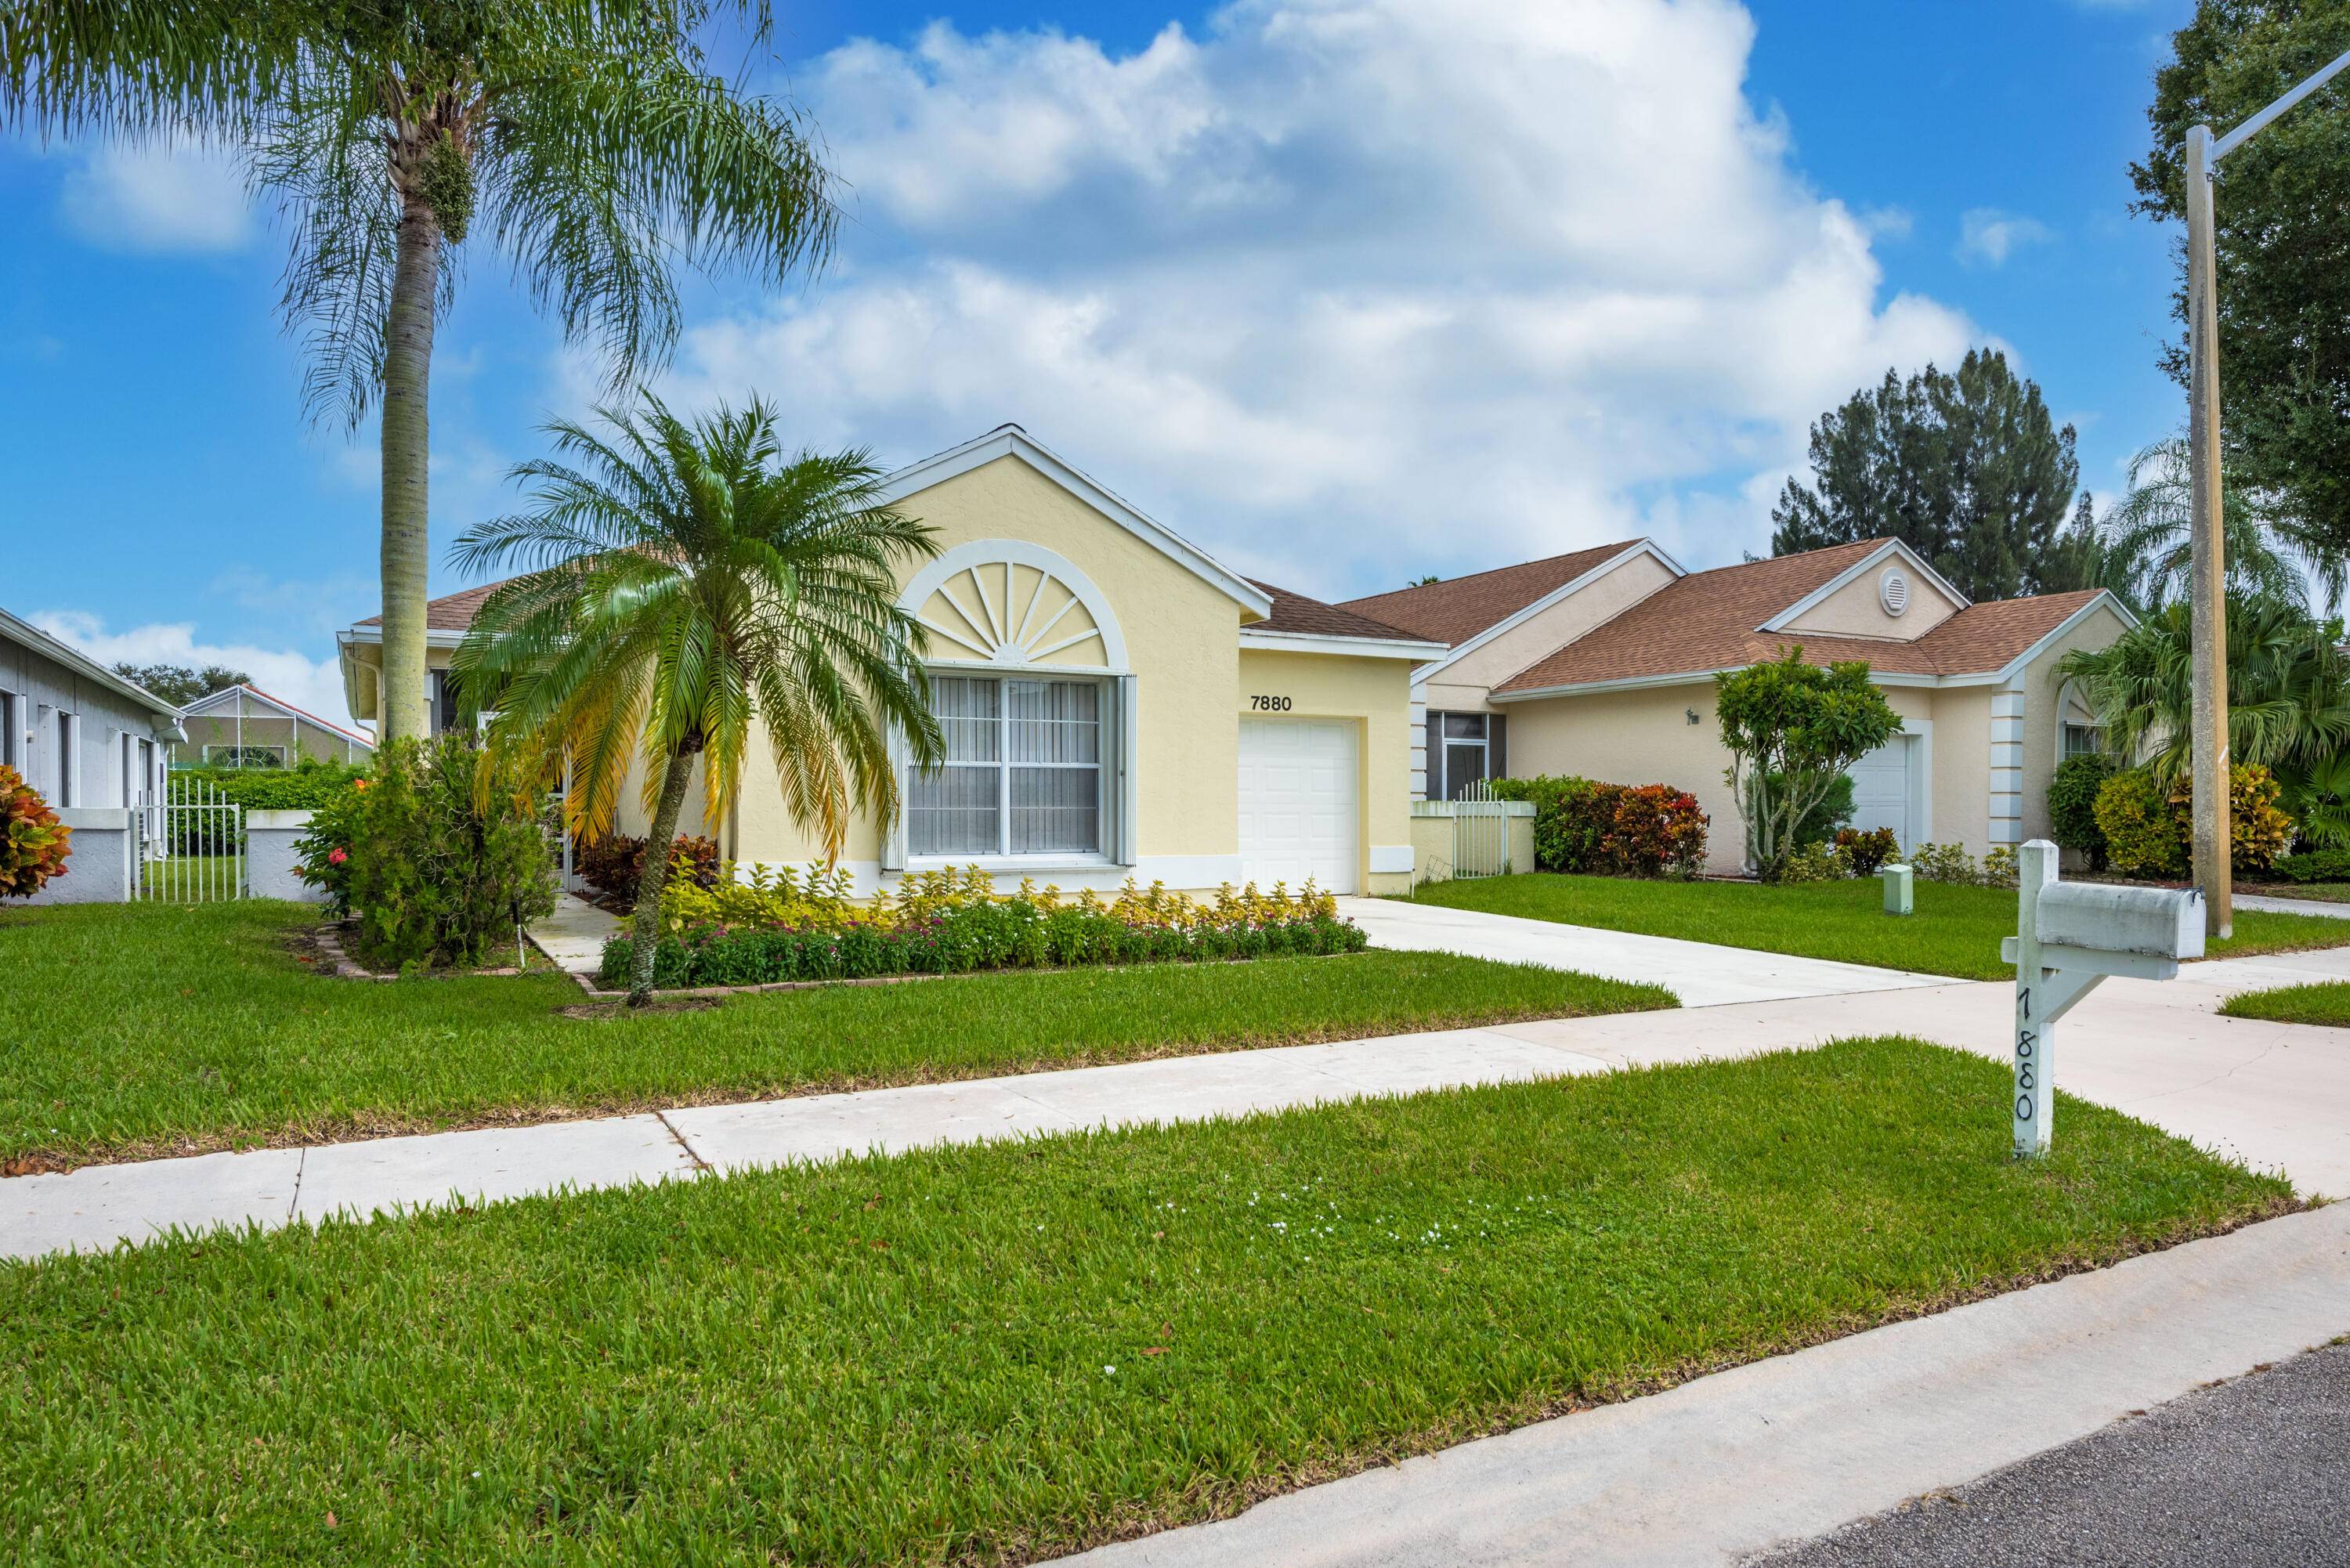 Just Reduced ! ! Inviting home located in Pine Ridge's desirable 55 community at Delray Beach.